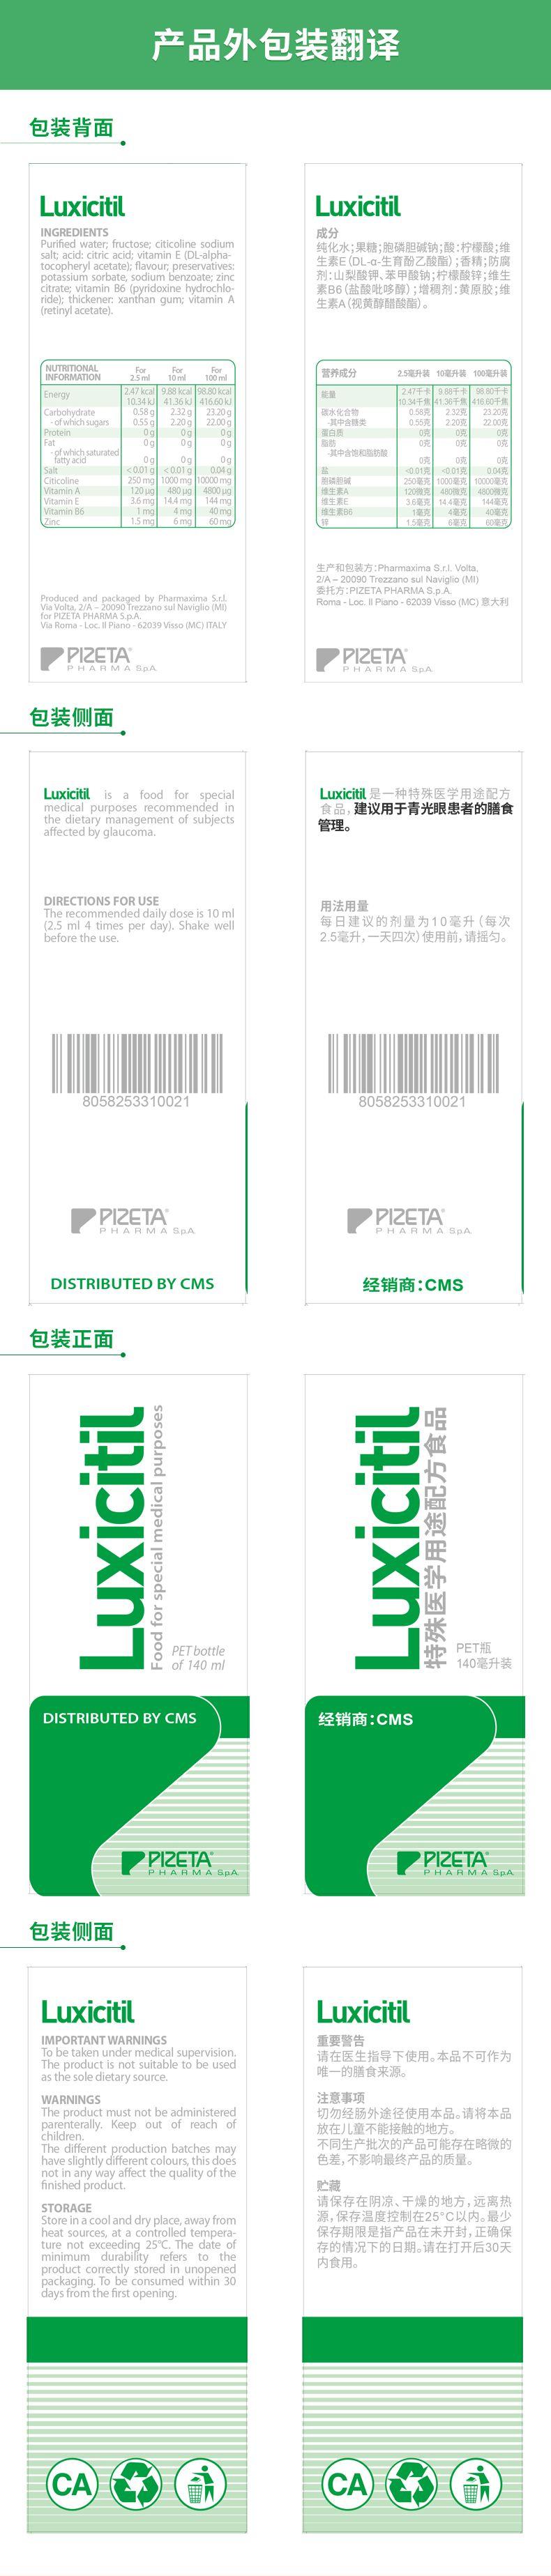 产品外包装翻译 包装背面 Lux ic itiL Luxi citi INGREDIENTS 成分 Purified water; fructose; citi co line sodium 纯化水;果糖;胞磷胆碱钠;酸:柠檬酸;维 salt; acid:citric acid; vitaminE(DL-alpha- tocopheryl acetate) ; flavour; preservatives: 生素E(DL-a-生育酚乙酸酯);香精;防腐 potassium sorbate, sodium benzoate; zinc 剂:山梨酸钾、苯甲酸钠;柠檬酸锌;维生 citrate; vitamin B 6(pyridoxine hydro chlo- 素B6(盐酸吡哆醇);增稠剂:黄原胶;维 ride) ; thickener:xanthan gum; vitaminA 生素A(视黄醇醋酸酯)。 (retinyl acetate) . NUTRITIONAL For For For INFORMATION 2.5ml 10ml 100ml 营养成分 2.5毫升装10毫升装100毫升装 Energy 2.47kcal 9.88kcal 98.80kcal 能量 2.7千卡 9.88千卡 98.80千卡 10.34kJ 41.36kJ 416.60kJ 10.34千焦 41.36千焦 416.60千焦 Carbohydrate 0.58g 2.32g 23.20g 碳水化合物 0.58克 2.32克 23.20克 -of which sugars 上 0.55g 2.20g 22.00g -其中含糖类 0.55克 2.20克 22.00克 Protein 0g 0g 0g 蛋白质 0克 0克 0克 Fat 0g 0g 0g 脂肪 0克 0克 0克 -gf which saturated -其中含饱和脂肪酸 fatty acid Ug 0g 0g 0克 0克 0克 Salt <0.01g <0.01g 0.04g 盐 <0.01克 0.01克 0.04克 Citi co line 250mg 1000mg 10000mg 磷胆碱 250毫克 1000毫克 10000毫克 VitaminA 120pg 480pg 4800pg 维生素A 120微克 480微克 4800微克 VitaminE 3.6mg 14.4mg 144mg 维生素E 3.6毫克 14.4毫克 144毫克 Vitamin B 6 1mg 4mg 40mg 维生素B6 1毫克 4毫克 40毫克 Zinc 1.5mg 6mg 60mg 锌 1.5毫克 国 6毫克 60毫克 生产和包装方:Pharm axim aS.r.l.Volta, 2/A-20090Trezzanosul Naviglio(MI) 委托方:PI ZETA PHARM AS.p.A. Produced and packaged by Pharm axim aS.r.l. Roma-Loc.ⅡPiano-62039Visso(MC) 意大利 Via Volta, 2/A-20090Trezzanosul Naviglio(MI) for PI ZETA PHARM AS.p.A. Via Roma-Loc.II Piano-62039Visso(MC) ITALY PI ZETA PI ZETA PHARM AS.pA PHARM AS.p.A 包装侧面 Lux ict il is a food for special Lux ic itil是一种特殊医学用途配方 medical purposes recommended in 食品,建议用于青光眼患者的膳食 the dietary management of subjects 管理。 affected by glaucoma. DIRECTIONS FOR USE 用法用量 The recommended daily doseis10ml (2.5ml 4 times per day) .Shake well 每日建议的剂量为10毫升(每次 before the use. 2.5毫升,一天四次)使用前,请摇匀。 8058253310021 8058253310021 PI ZETA PI ZETA PHARM AS.pA. PHARMA SpA. DISTRIBUTED BY CMS 经销商:CMS 包装正面 1 u ovE ooo PET bottle PET瓶 of140ml 140毫升装 DISTRIBUTED BY CMS 经销商:CMS PI ZETA PI ZETA PHARMA SpA. PHARM AS.pA 包装侧面 Luxi citi Luxi citi IMPORTANT WARNINGS 重要警告 To be taken under medical supervision. 请在医生指导下使用。本品不可作为 The product is not suitable to be used as the sole dietary source. 唯一的膳食来源。 WARNINGS 注意事项 The product must not be administered 切勿经肠外途径使用本品。请将本品 parenterally.Keep out of reach of 放在儿童不能接触的地方。 children. The different production batches may 不同生产批次的产品可能存在略微的 have slightly different colours, this does 色差,不影响最终产品的质量。 not in anyway affect the quality of the finished product. 贮藏 请保存在阴凉、干燥的地方,远离热 STORAGE Store in a cool and dry place, away from 源,保存温度控制在25°C以内。最少 heat sources, at a controlled tempera- 保存期限是指产品在未开封,正确保 ture not exceeding 25℃.The date of 存的情况下的日期。请在打开后30天 minimum durability refers to the 内食用。 product correctly stored in unopened packaging.To be consumed within 30 days from the first opening. CA CA 